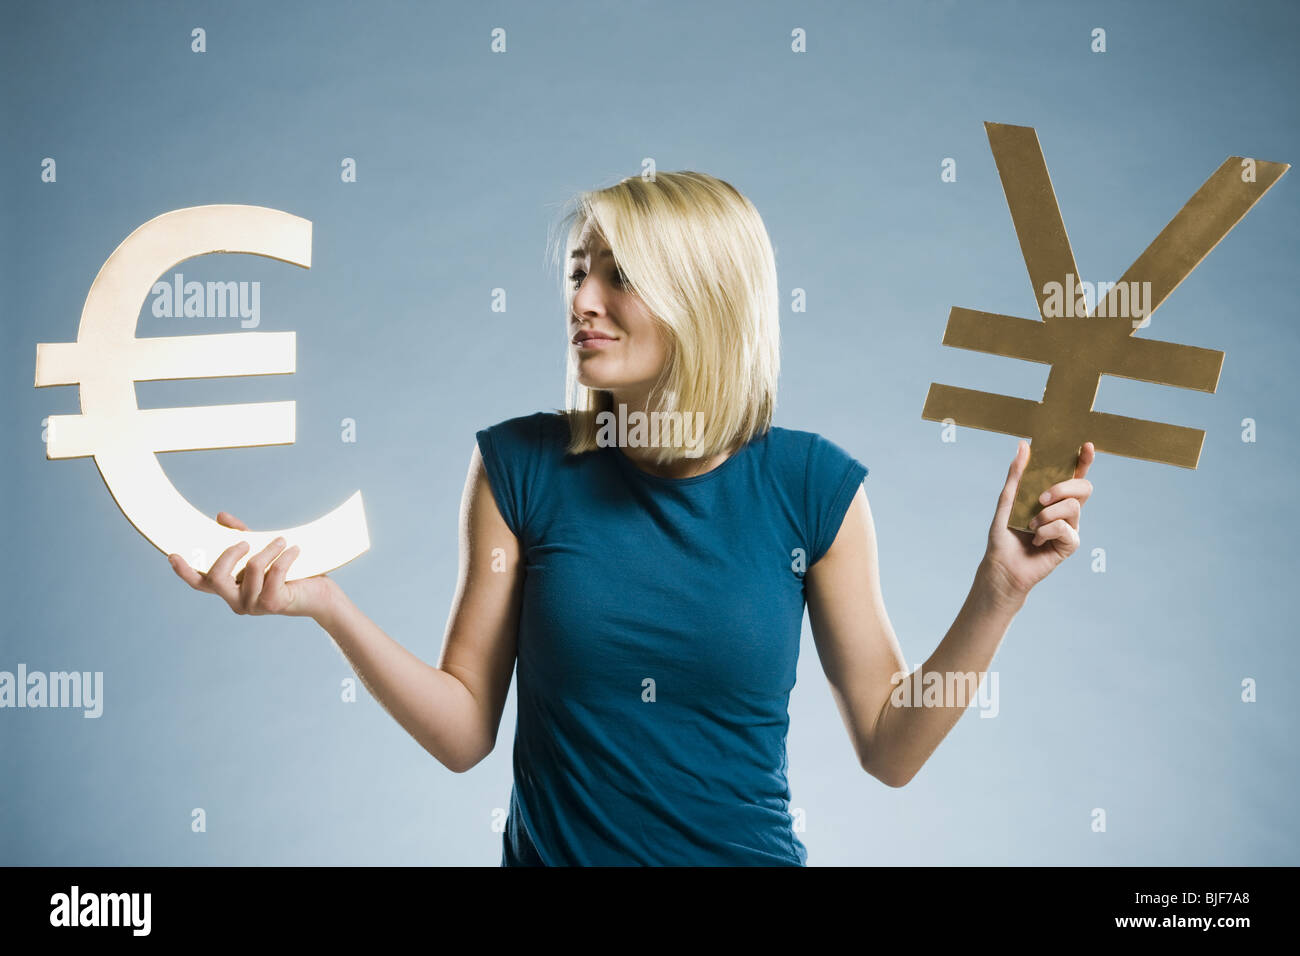 woman holding up currency symbols Stock Photo